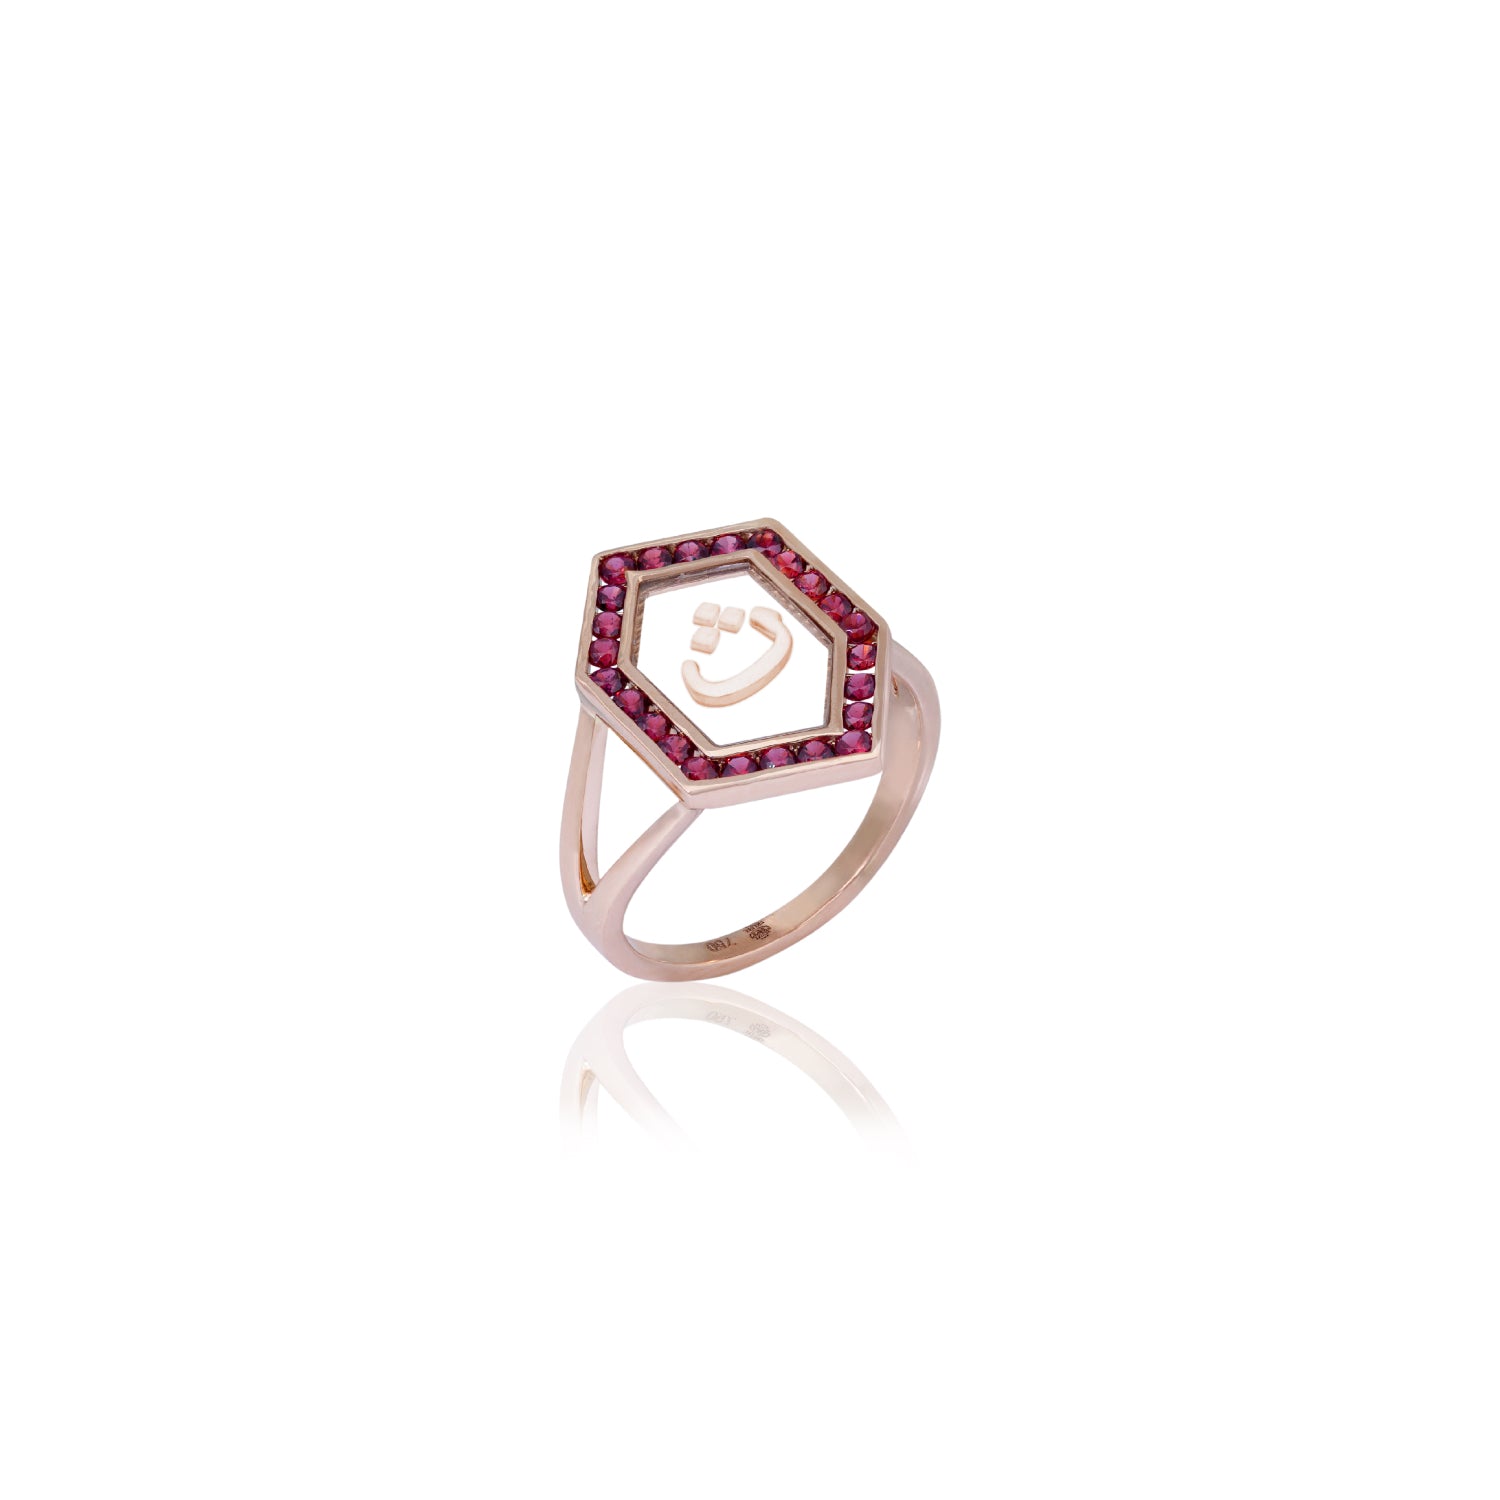 Qamoos 1.0 Letter ث Ruby Ring in Rose Gold